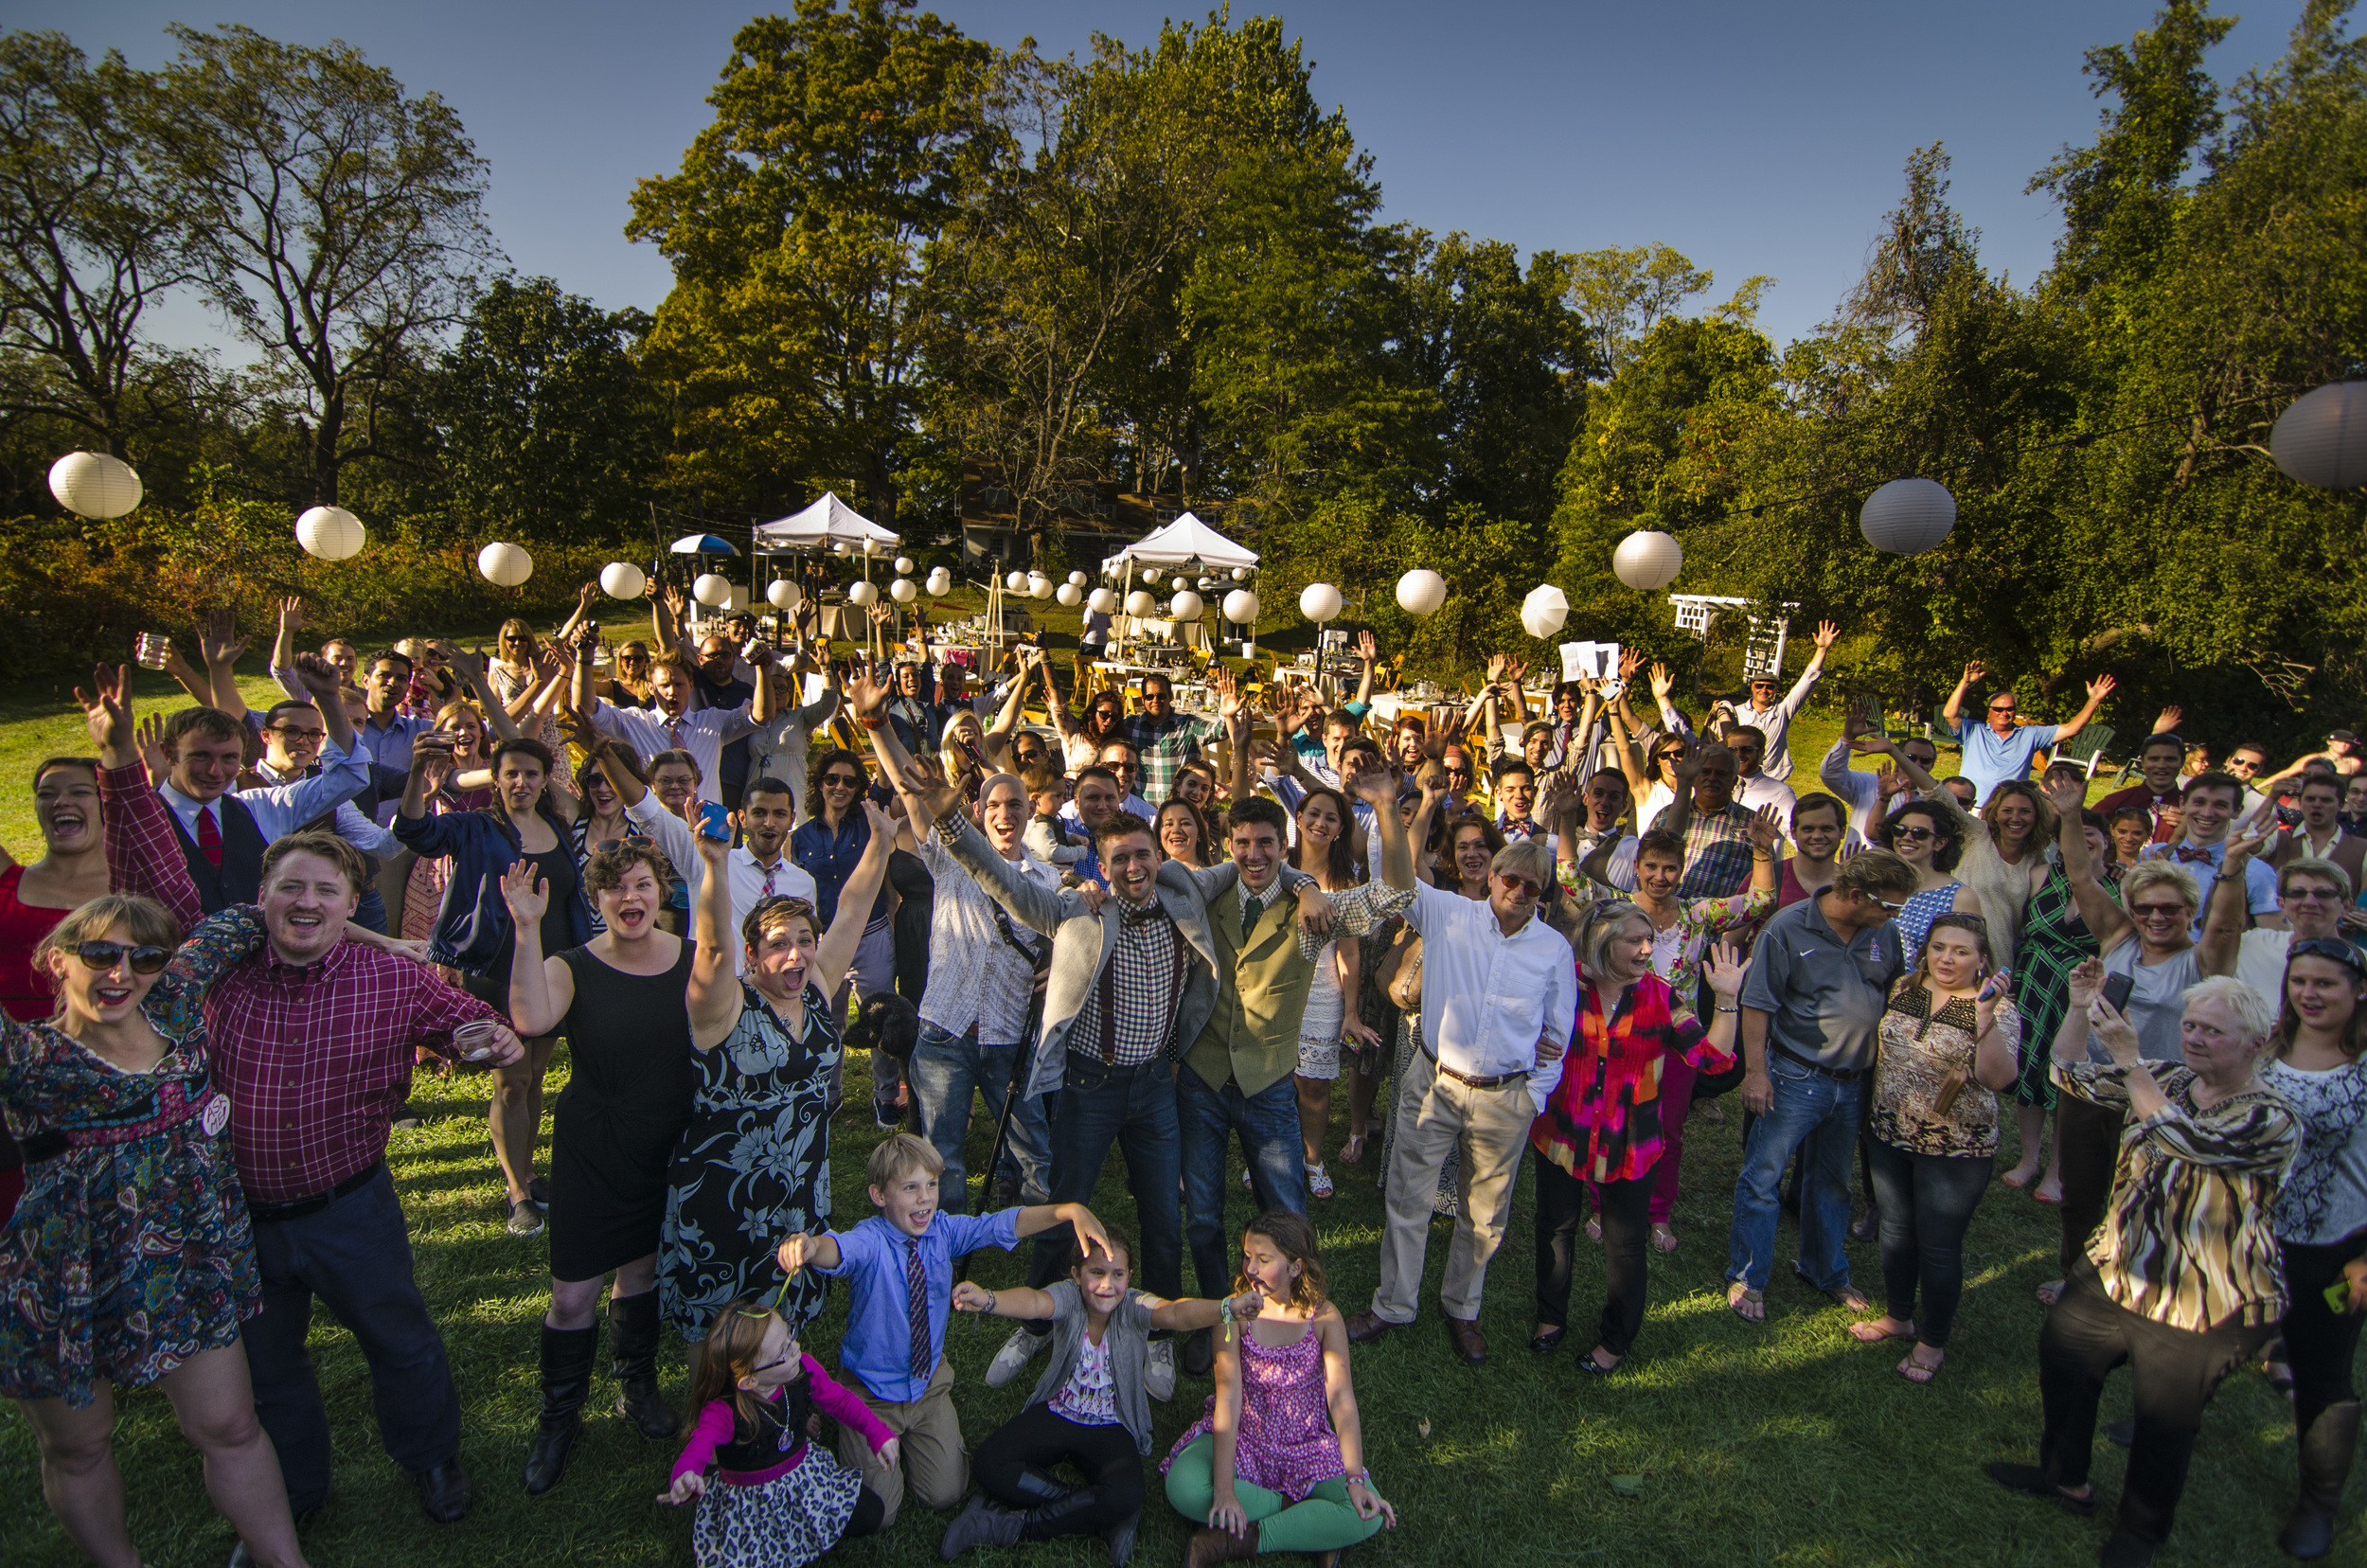   2014 wedding on the Bowling Green, taken from the outdoor stage. The Bowling Green can accommodate up to 400 guests.  